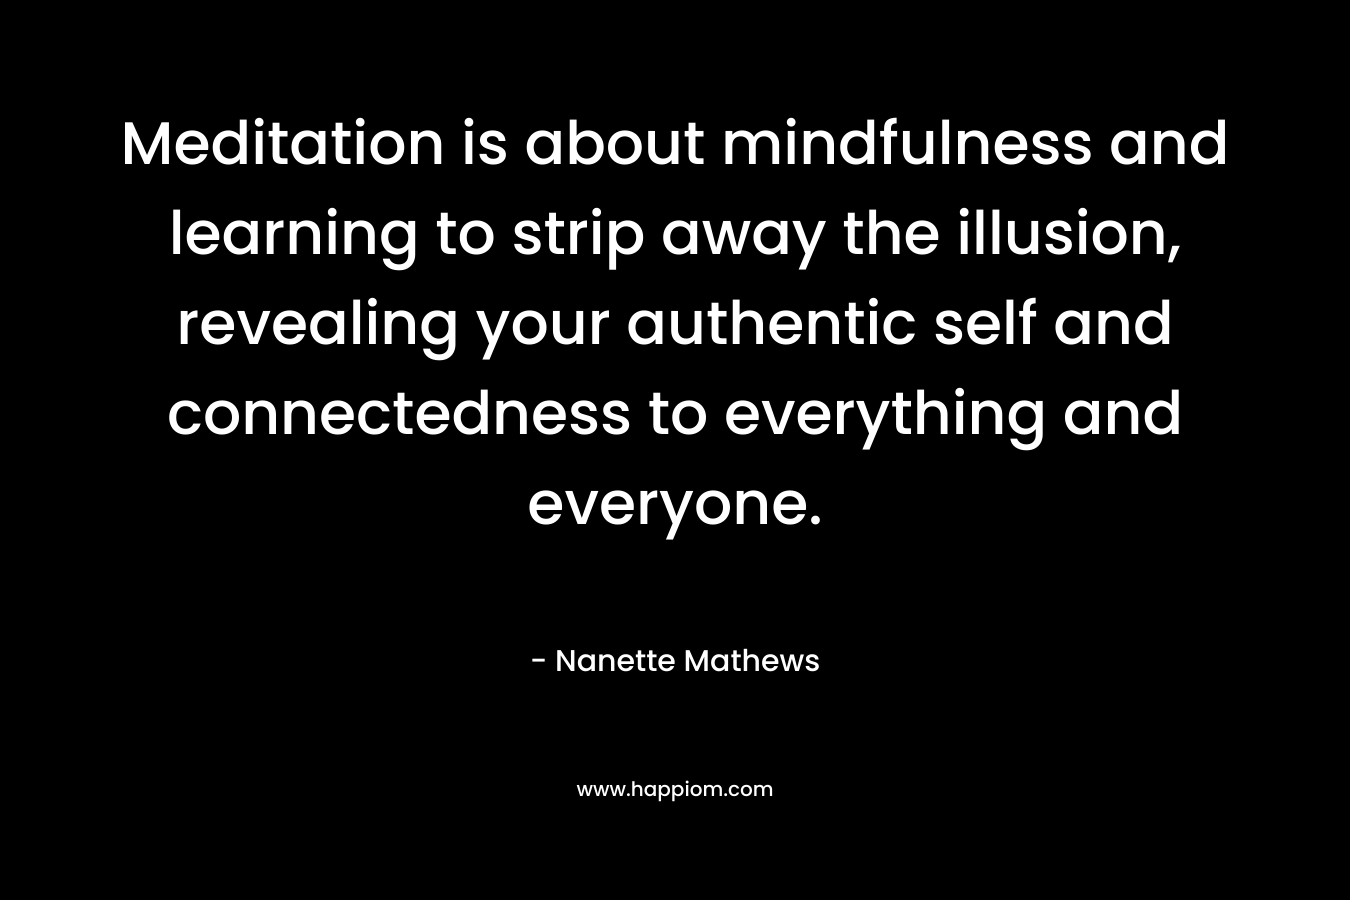 Meditation is about mindfulness and learning to strip away the illusion, revealing your authentic self and connectedness to everything and everyone. – Nanette Mathews